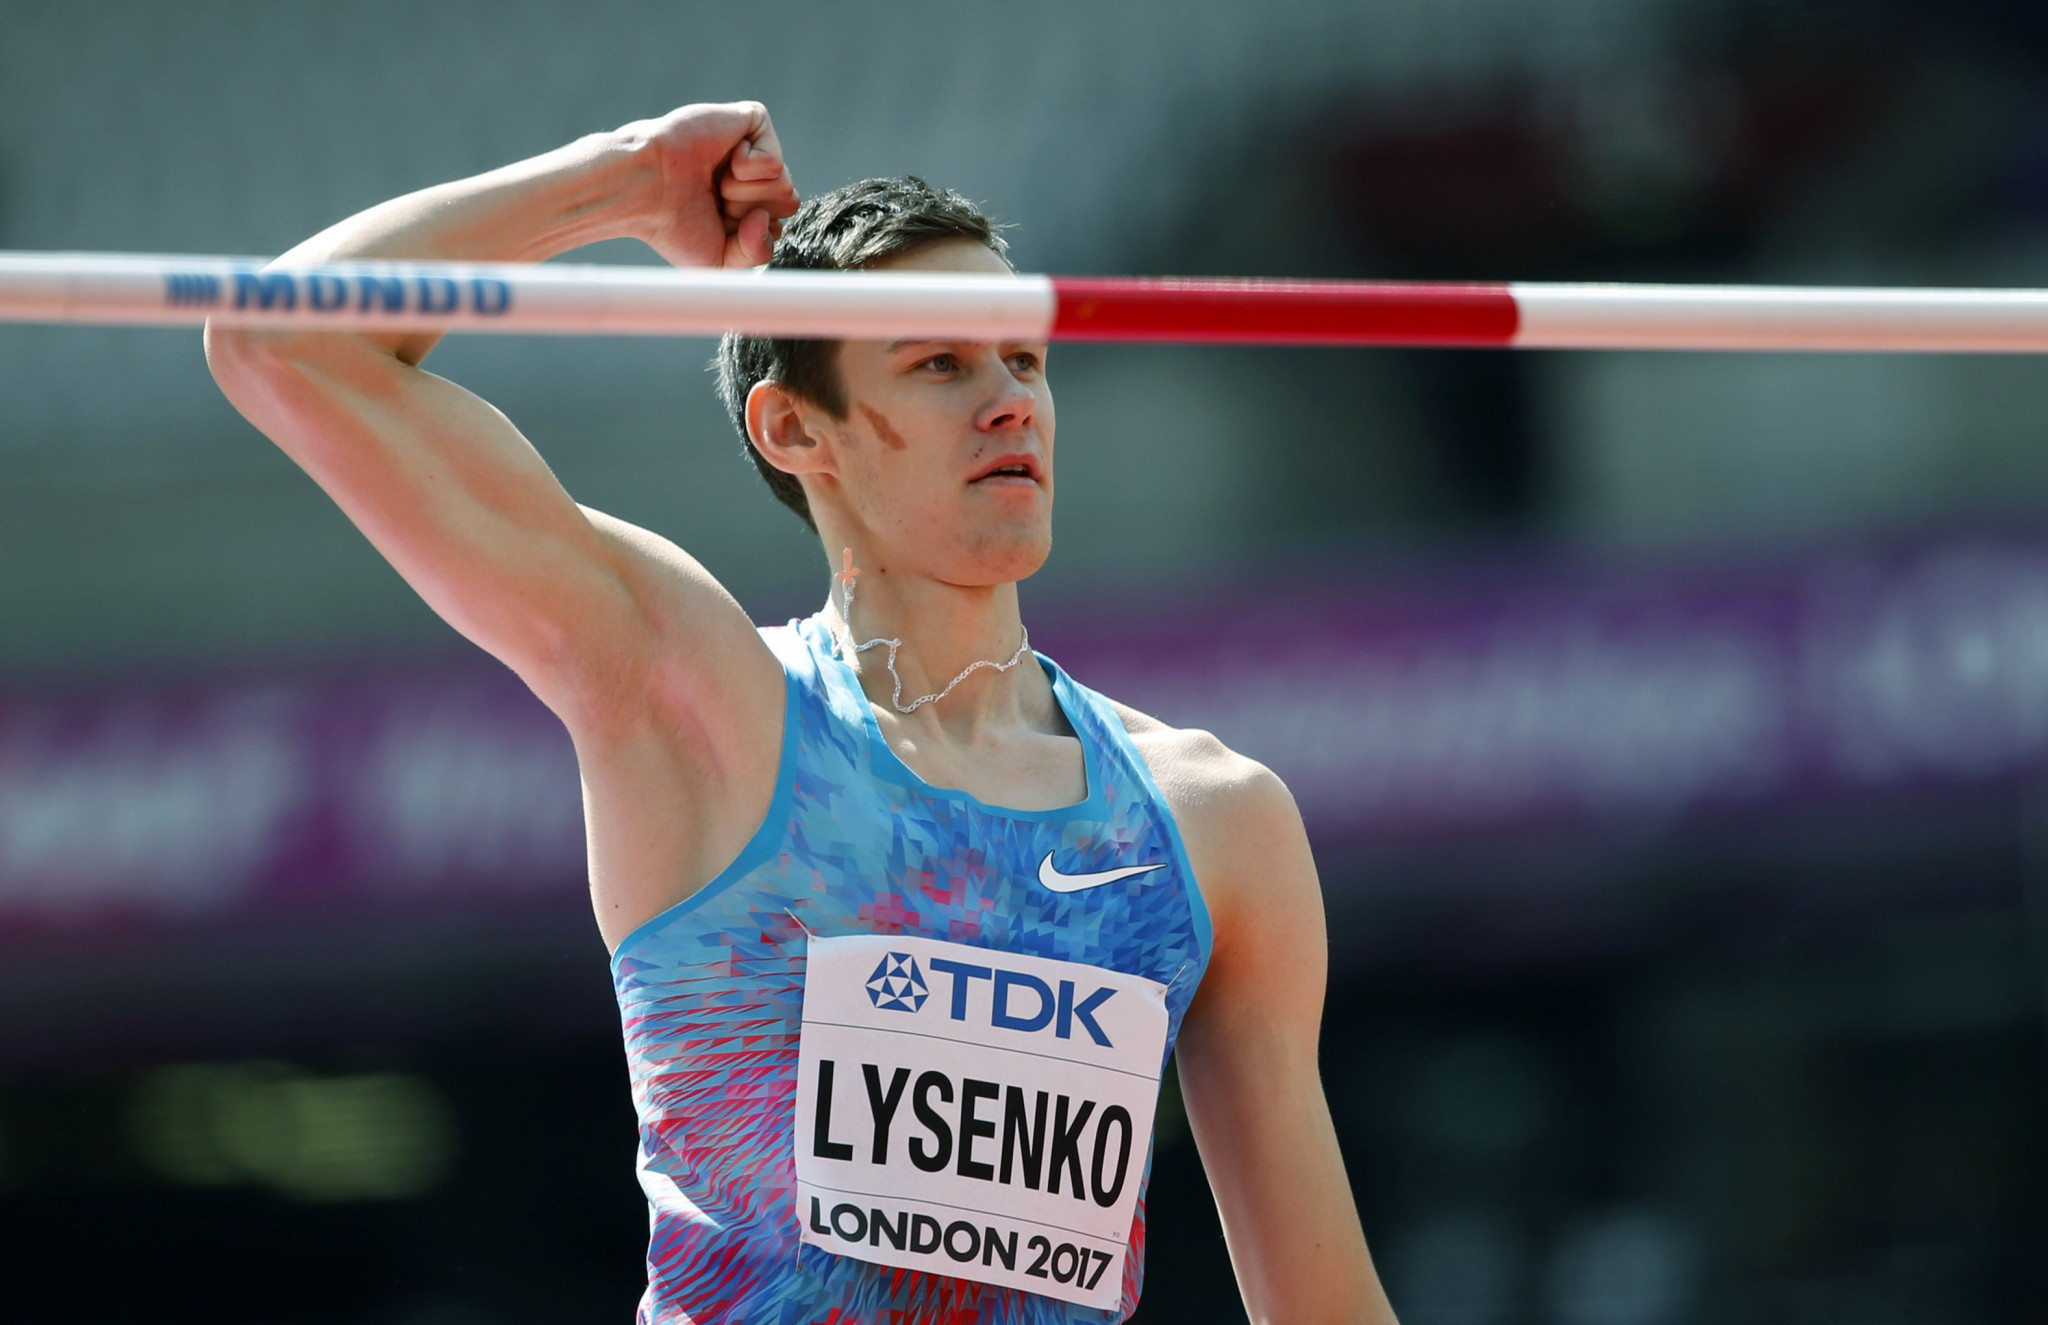 High jumper Danil Lysenko is one athlete highlighted in the report who would be expected to be competitive on the current world stage ©Getty Images